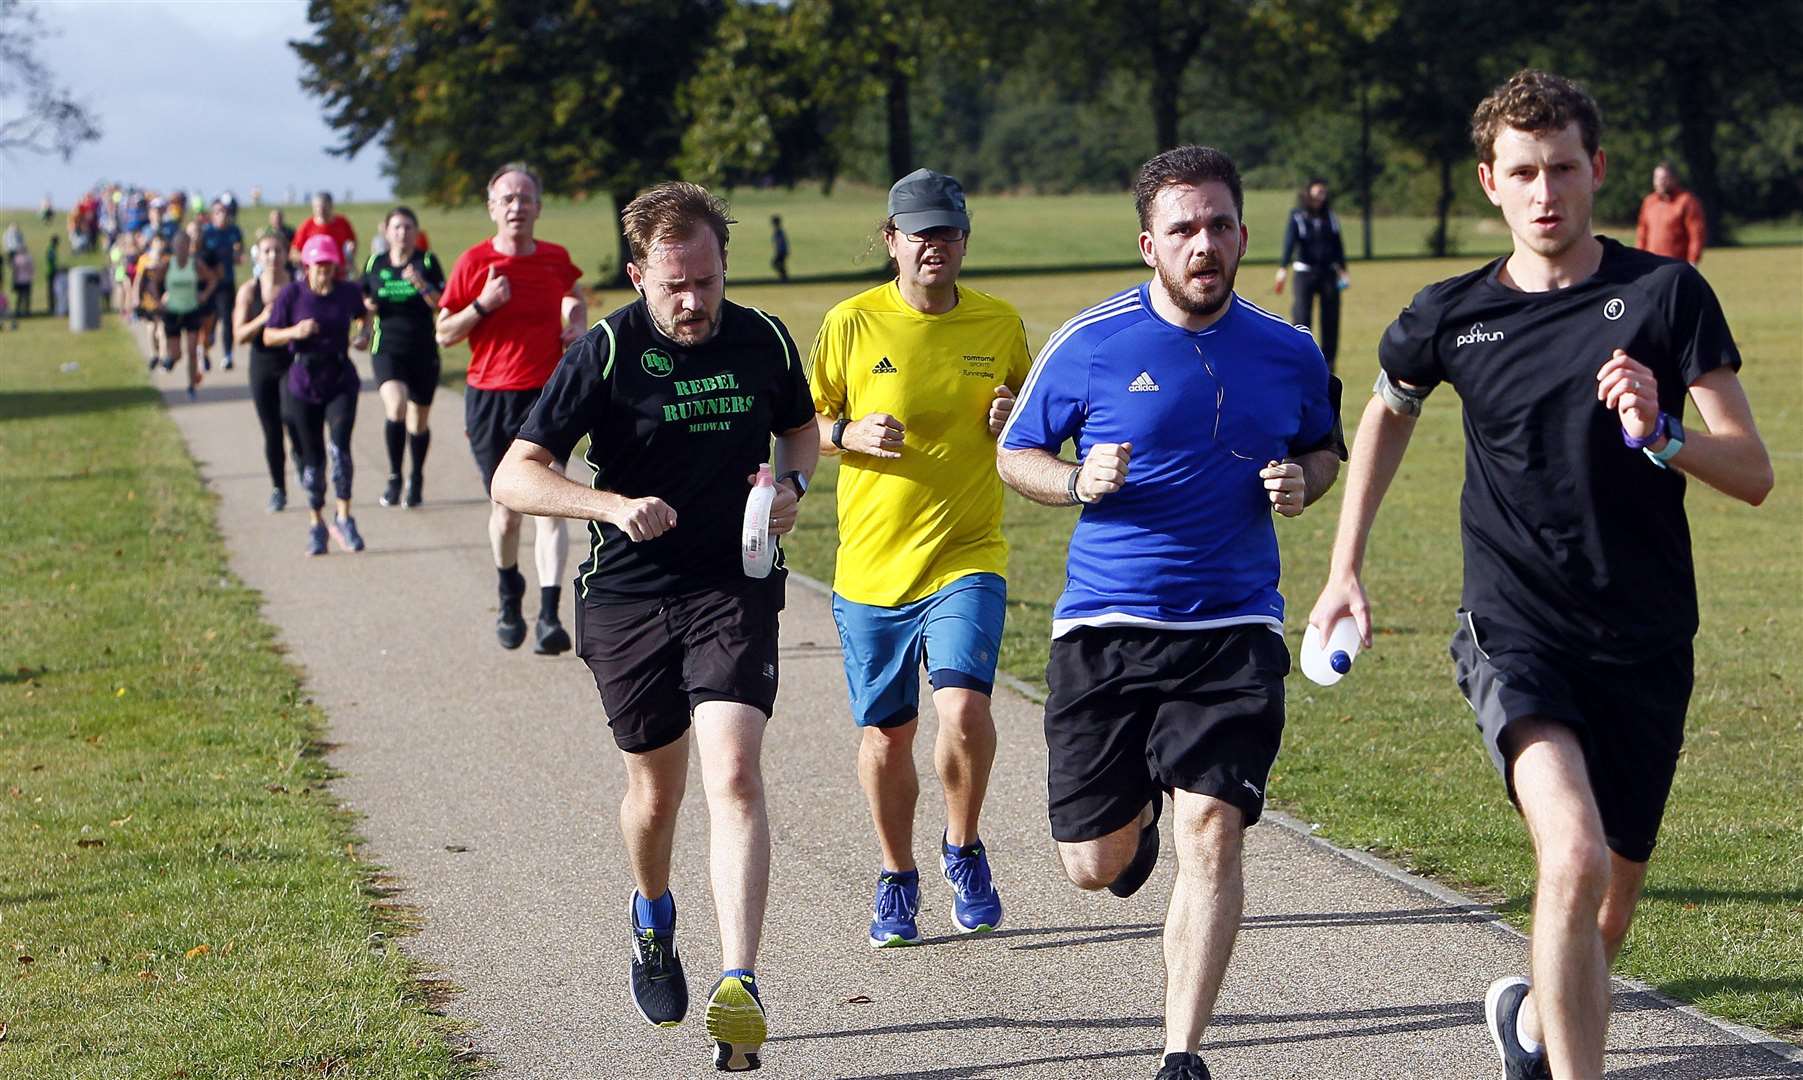 The Parkrun at Great Lines Heritage Park in Medway is one of the most popular in Kent